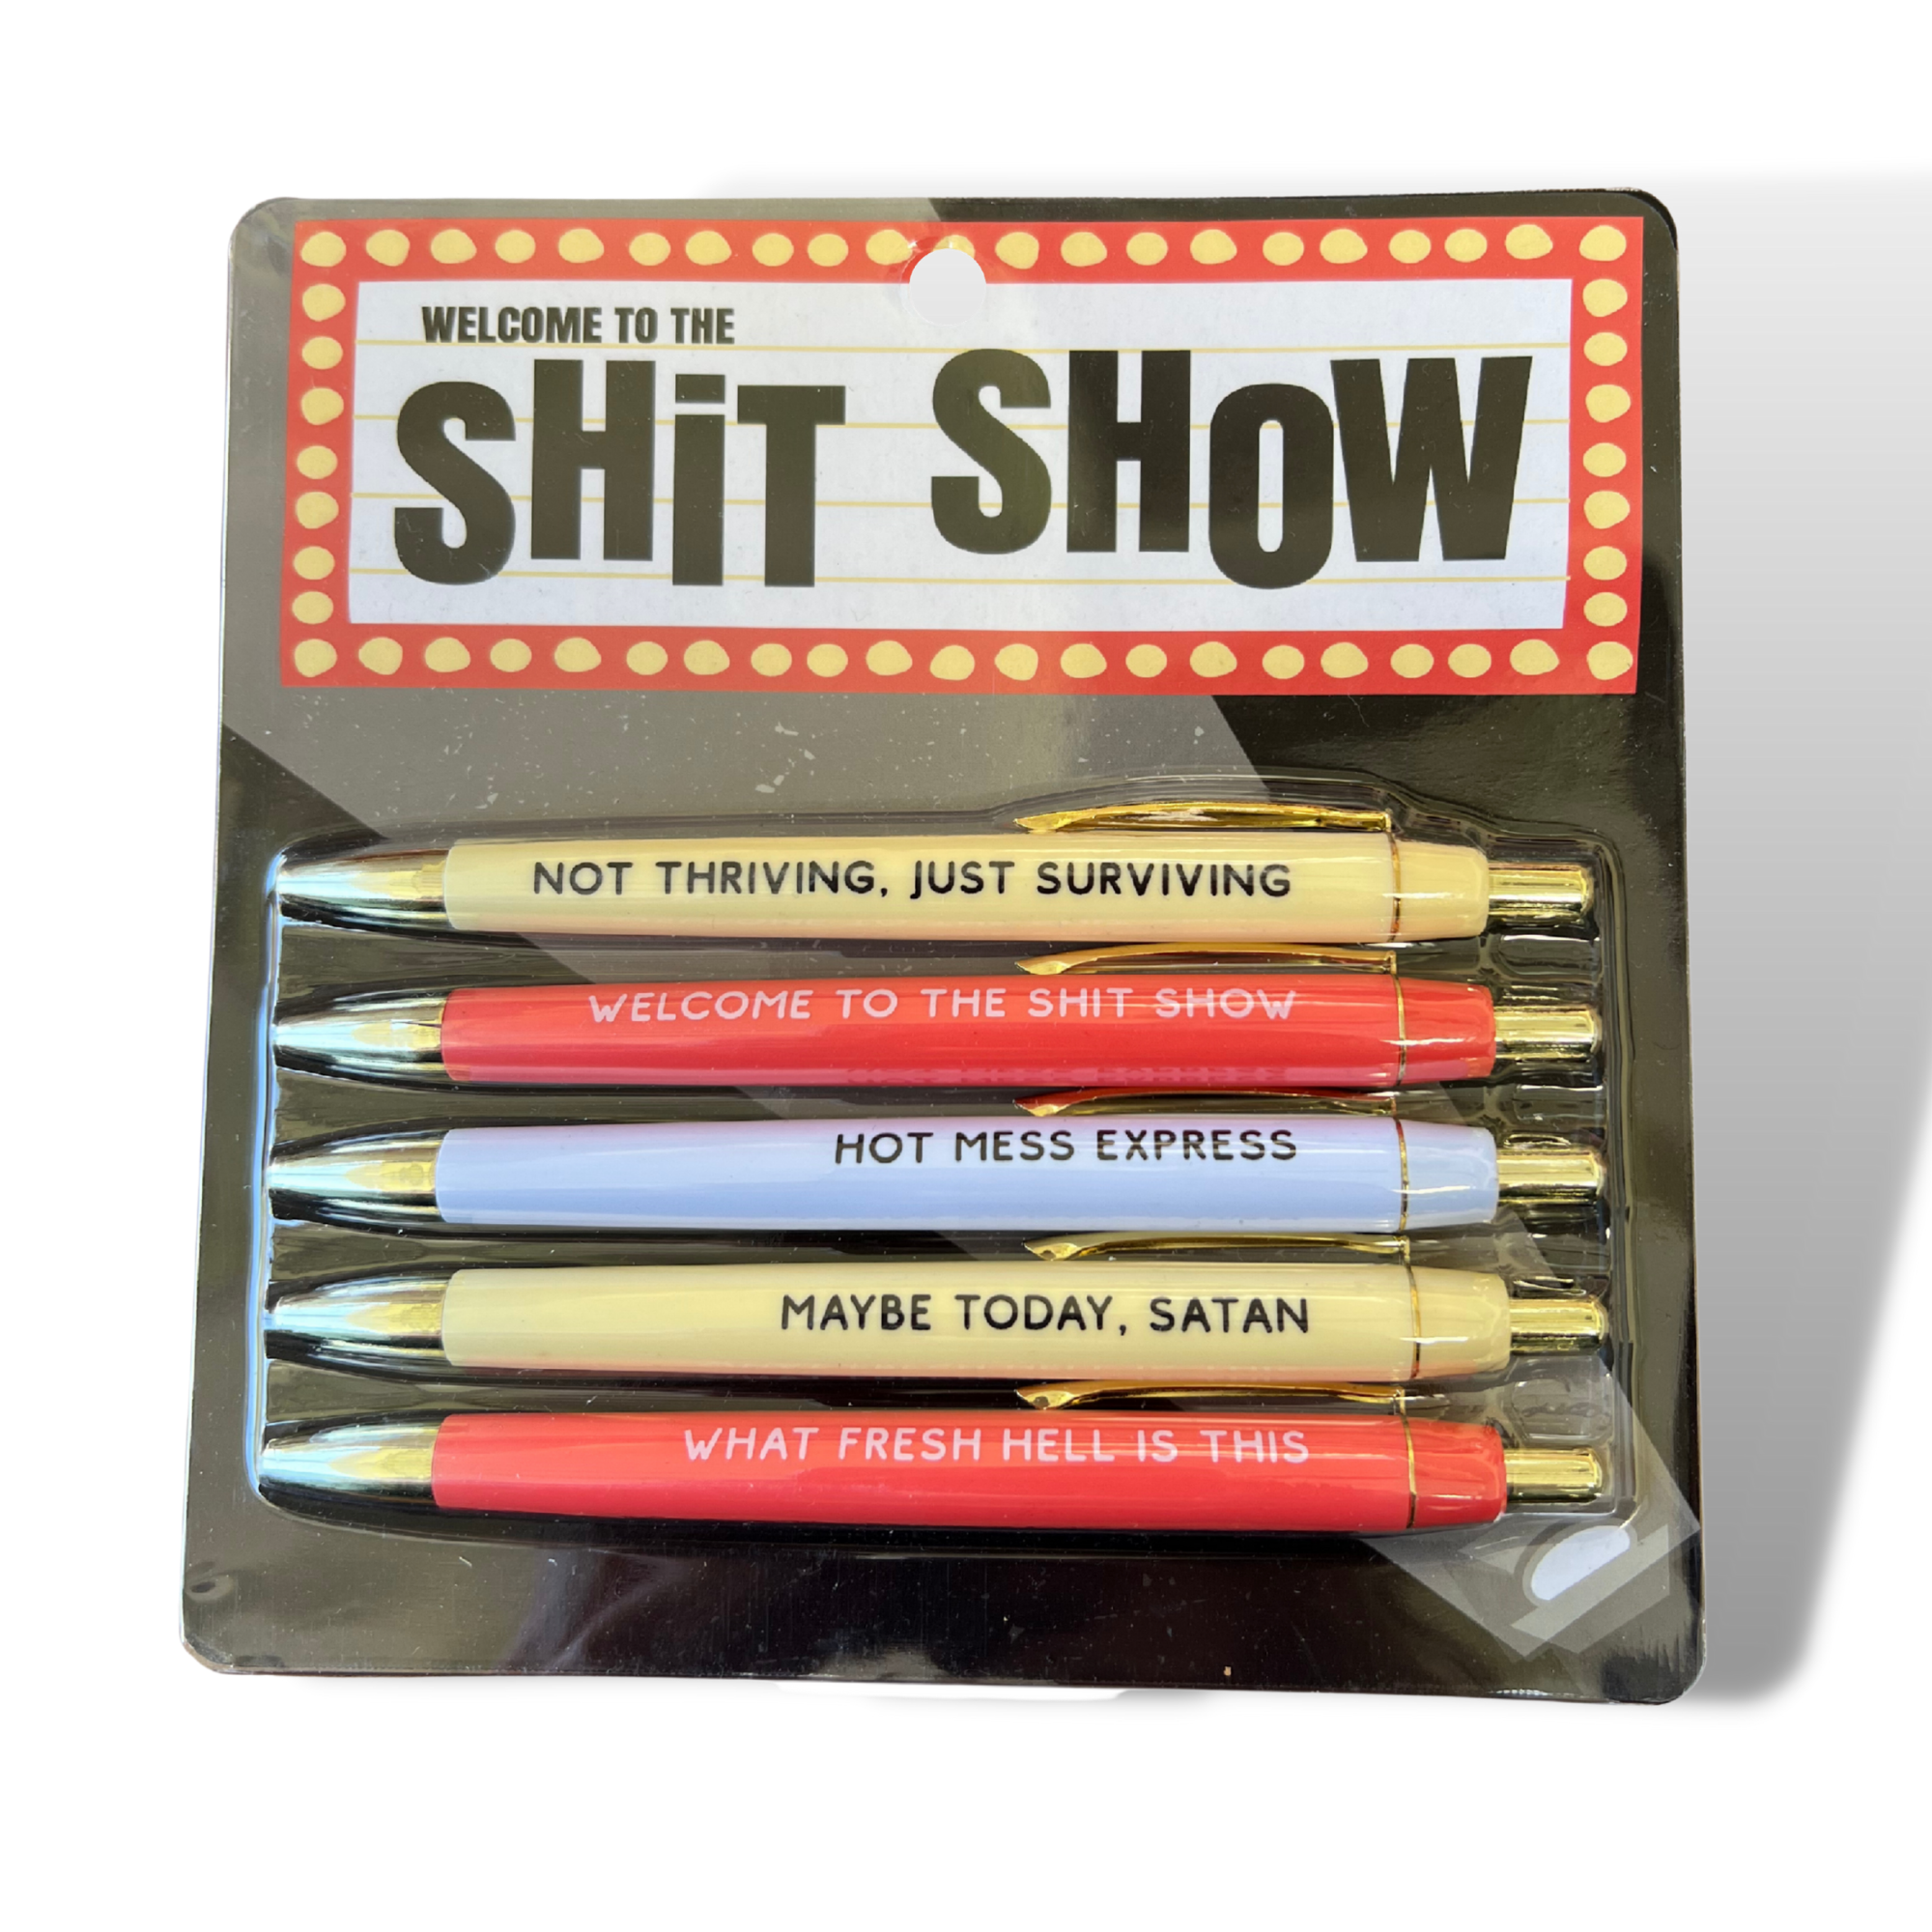 Buy wholesale SWEARY PENS / F*ck This Shit / Funny Rude Pens / Adults Only